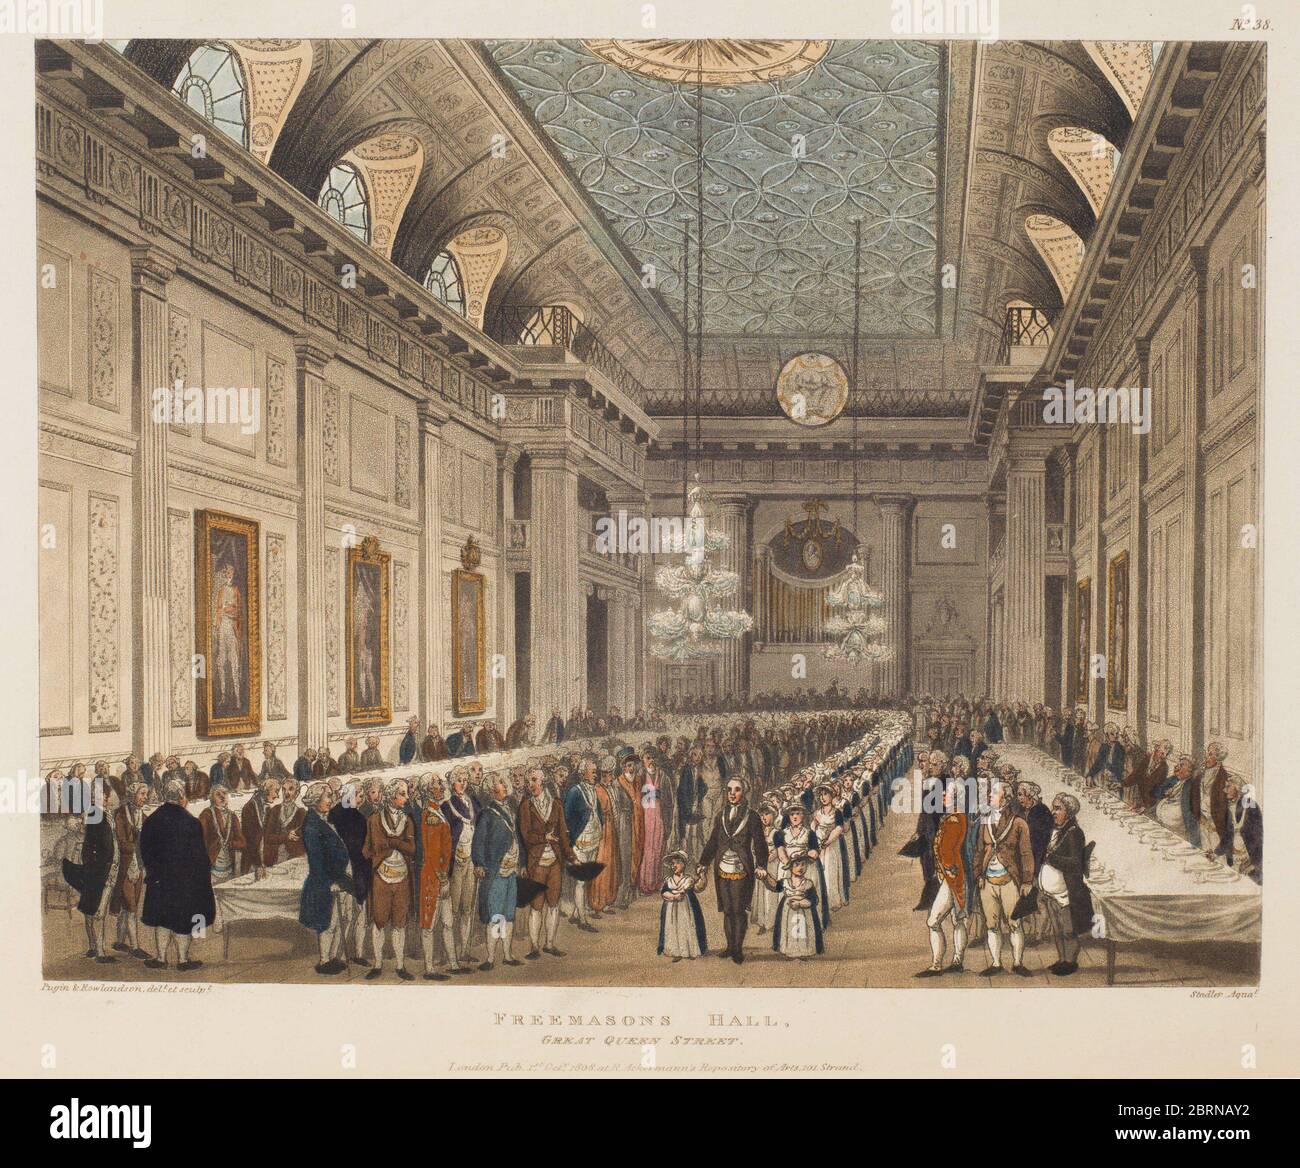 Freemasons' Hall, microcosme de Londres, pl. 38, Location Private Collection Banque D'Images